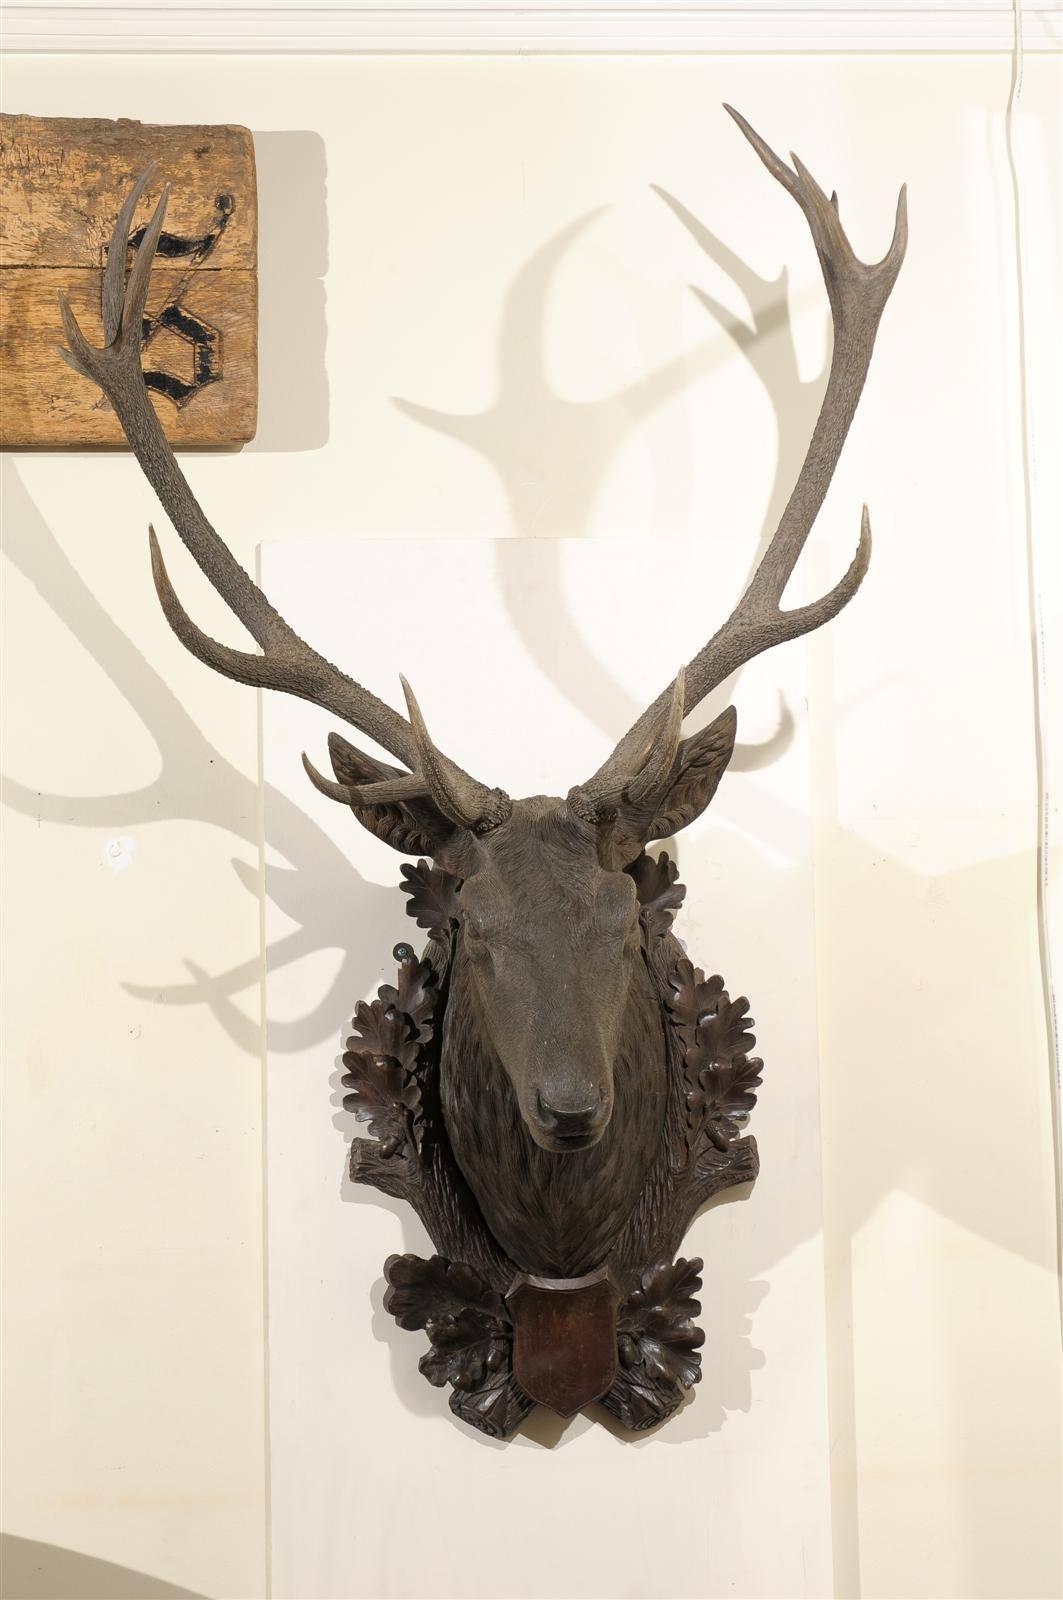 In the 1870s in Switzerland carvers were interested in carving things related to the outdoors such as hunting, skiing and wildlife. A stag head of this size is very rare and hard to come by. The Oak wreath around the neck of the stag represents a